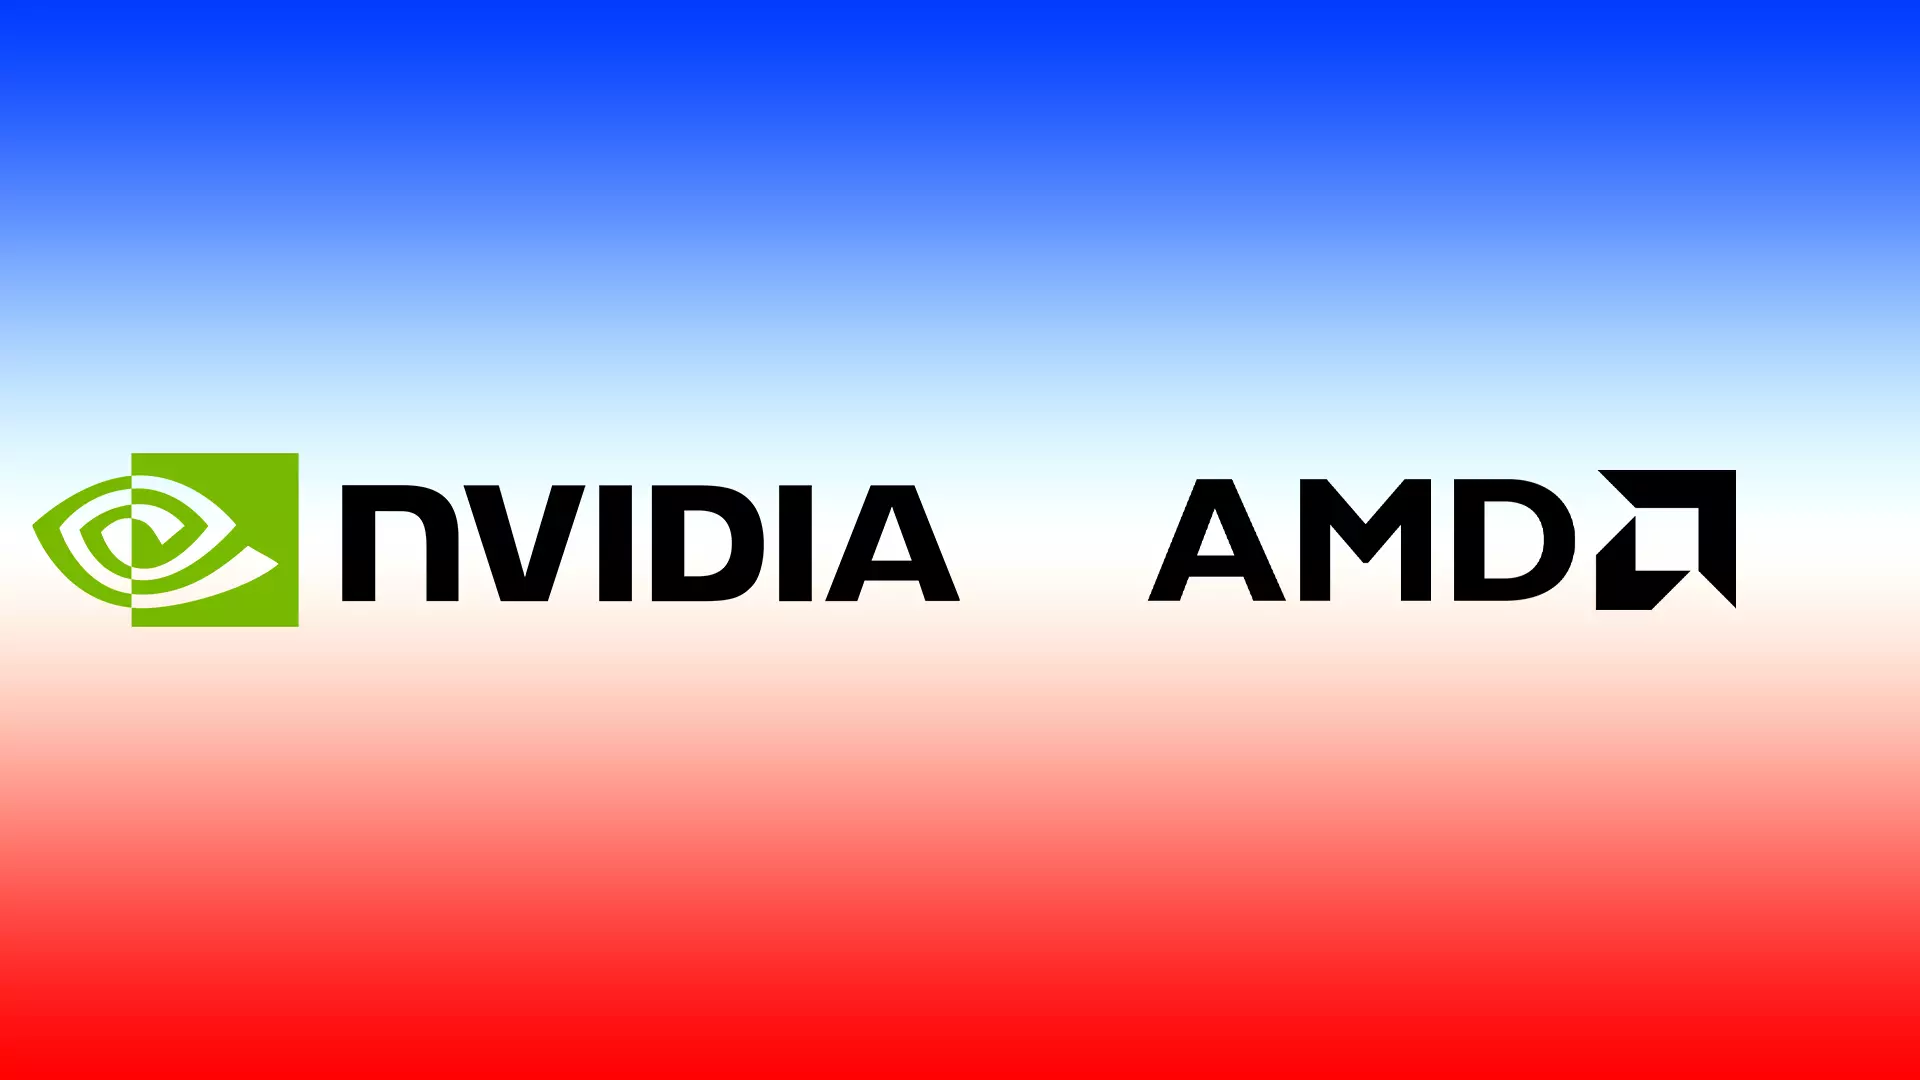 U.S. government banned sales of AMD and Nvidia's high-end computers chips to China and Russia